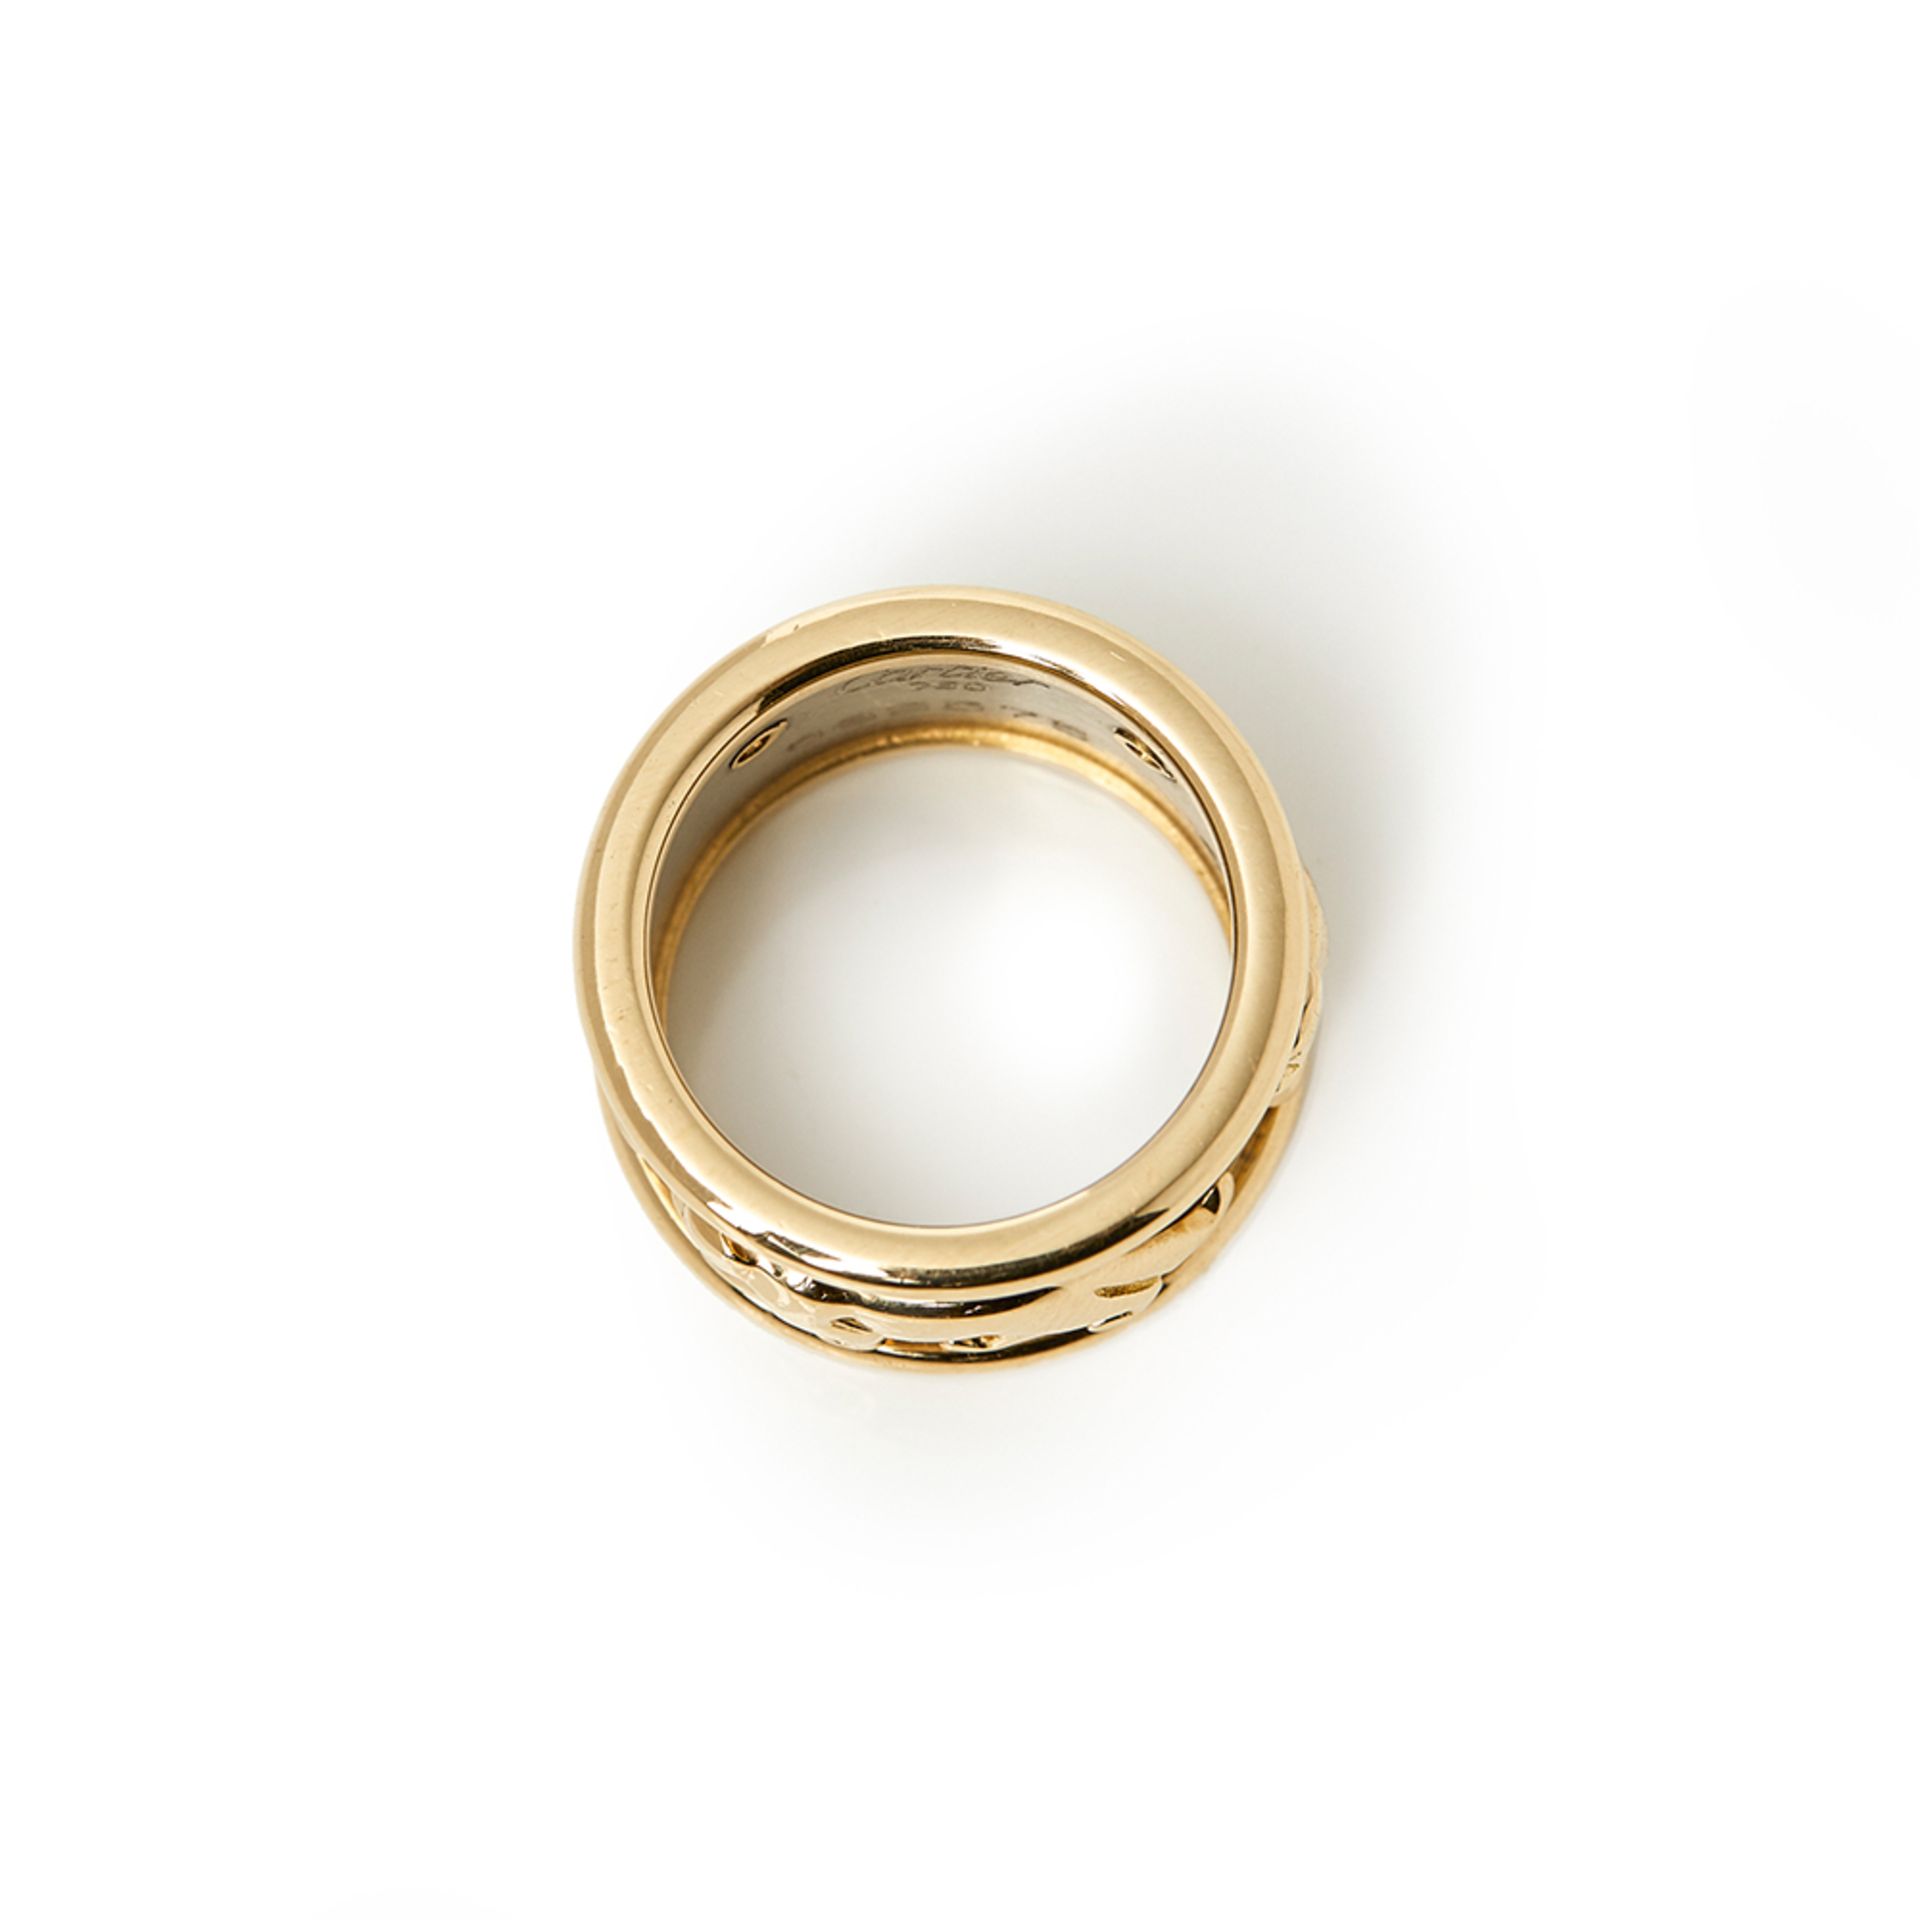 Cartier, 18k Yellow & 18k White Gold Panthère Ring - Image 5 of 7